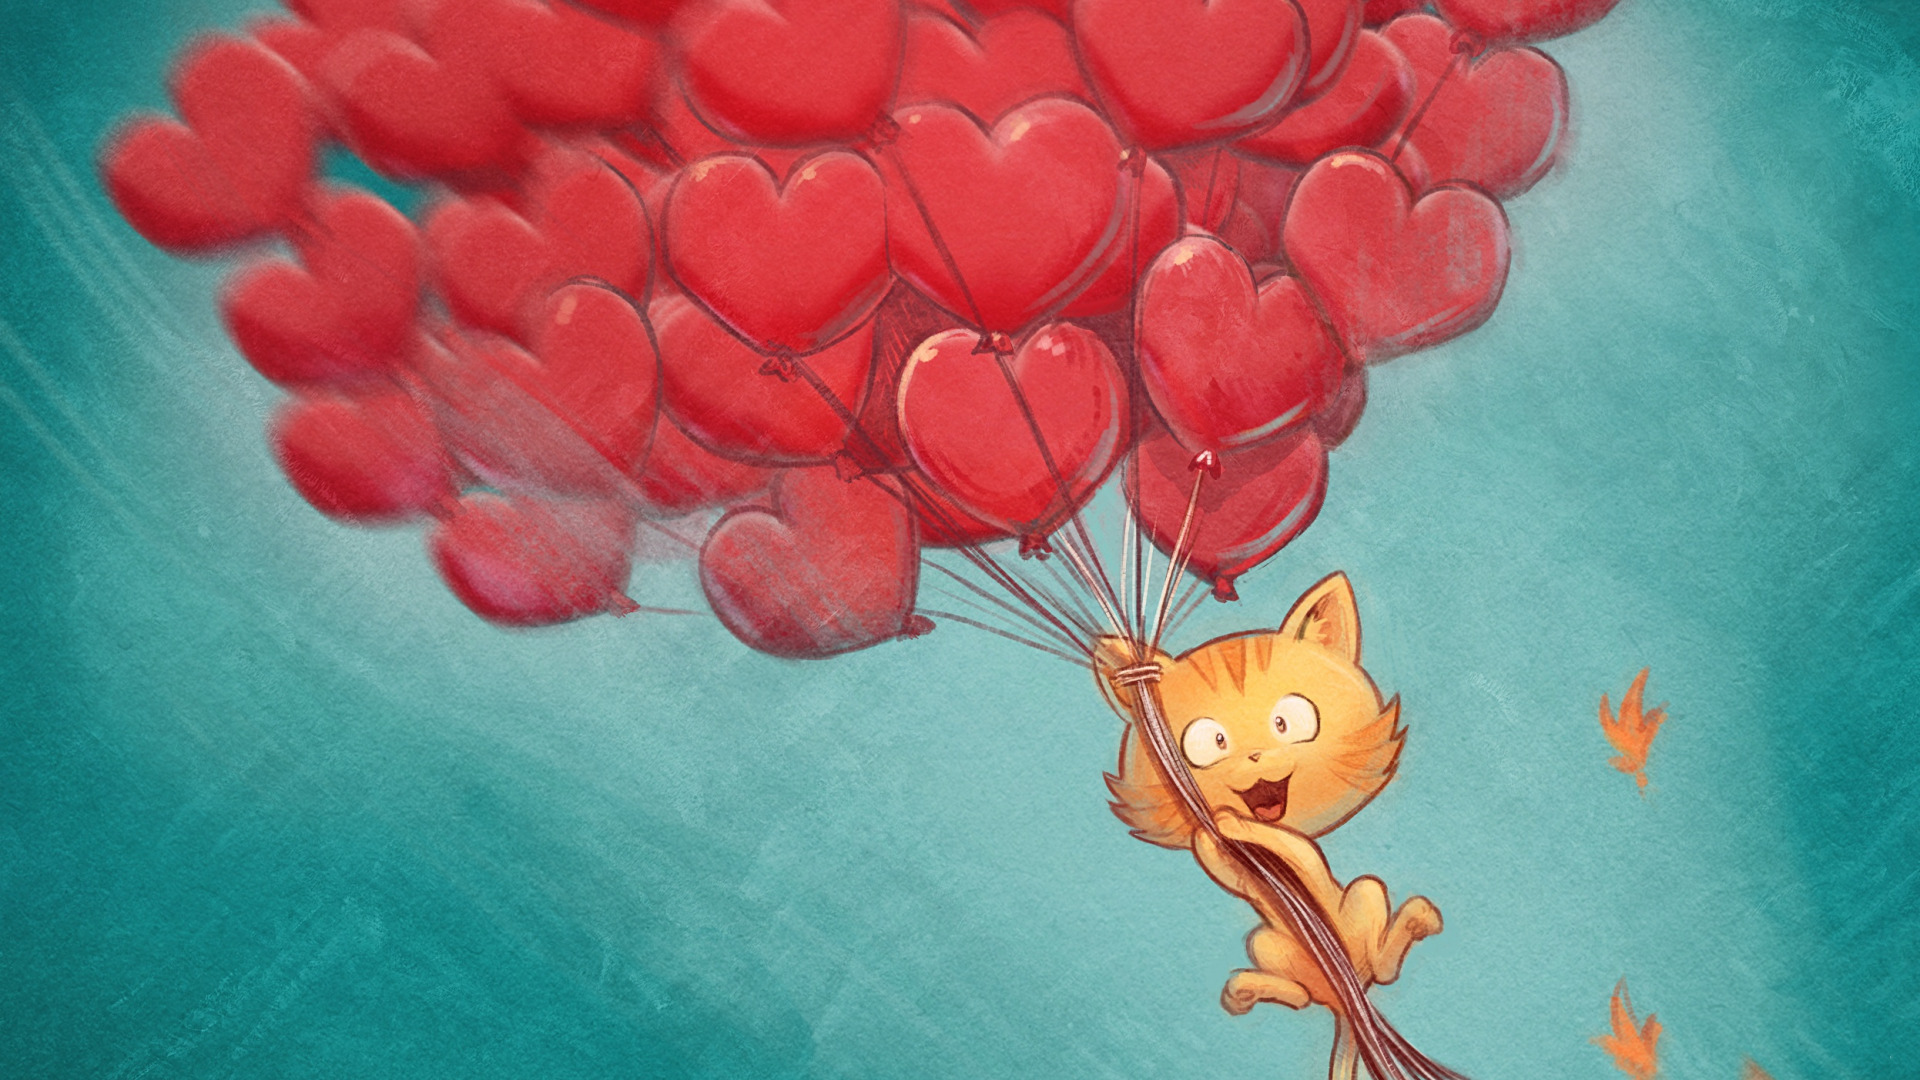 General 1920x1080 cats balloon red heart flying